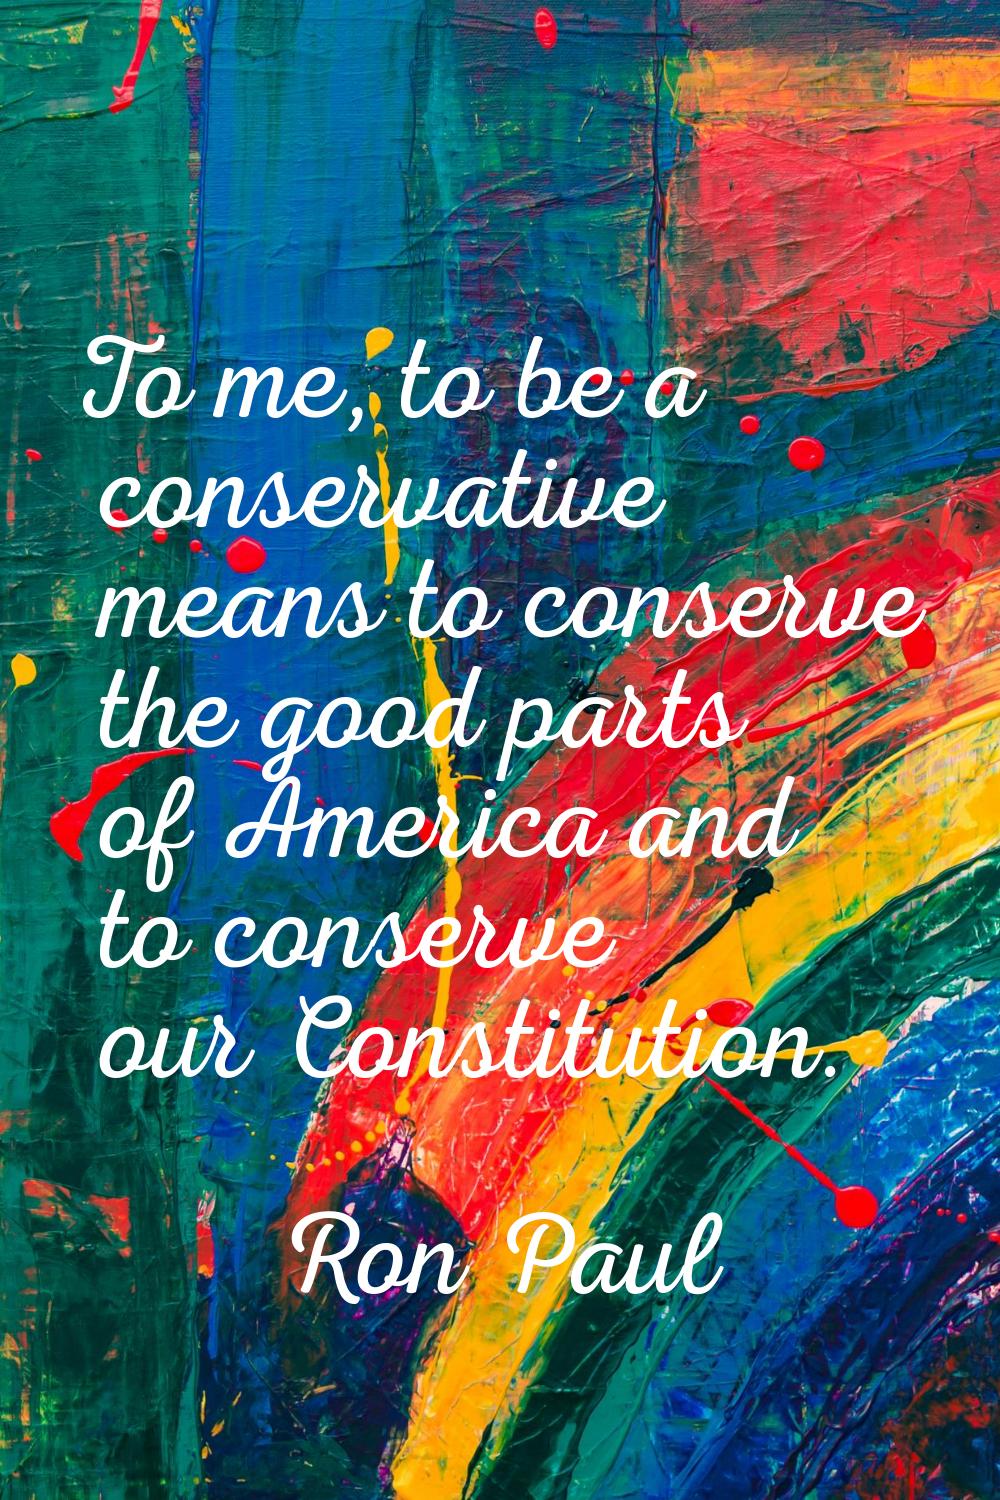 To me, to be a conservative means to conserve the good parts of America and to conserve our Constit